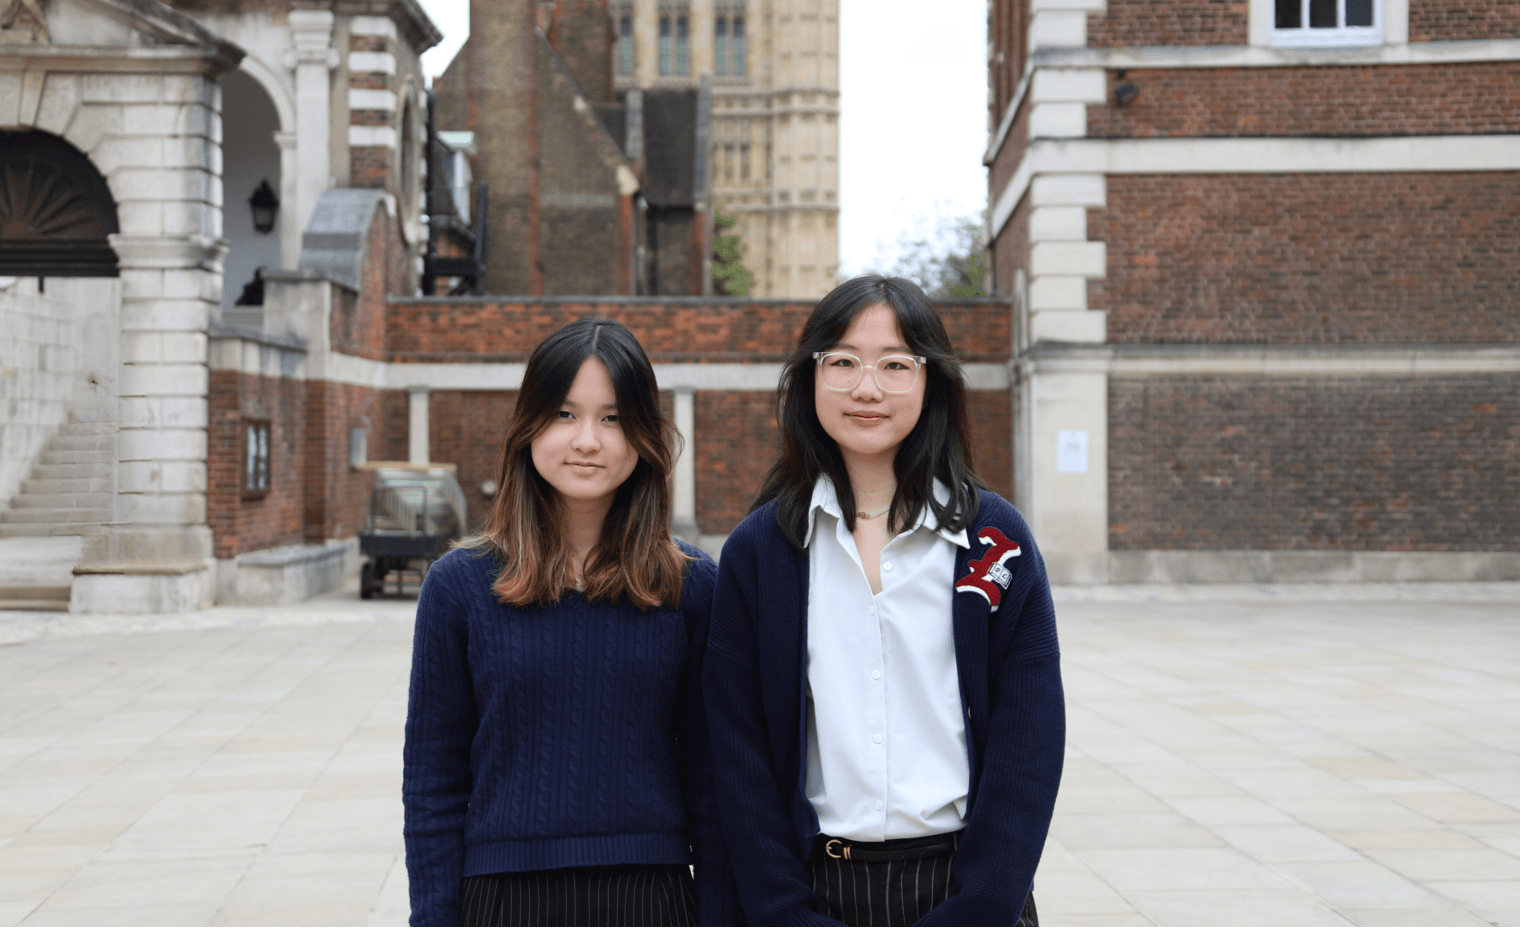 Essay winning pupils, Genevieve and Lillie, stand in Little Dean's Yard